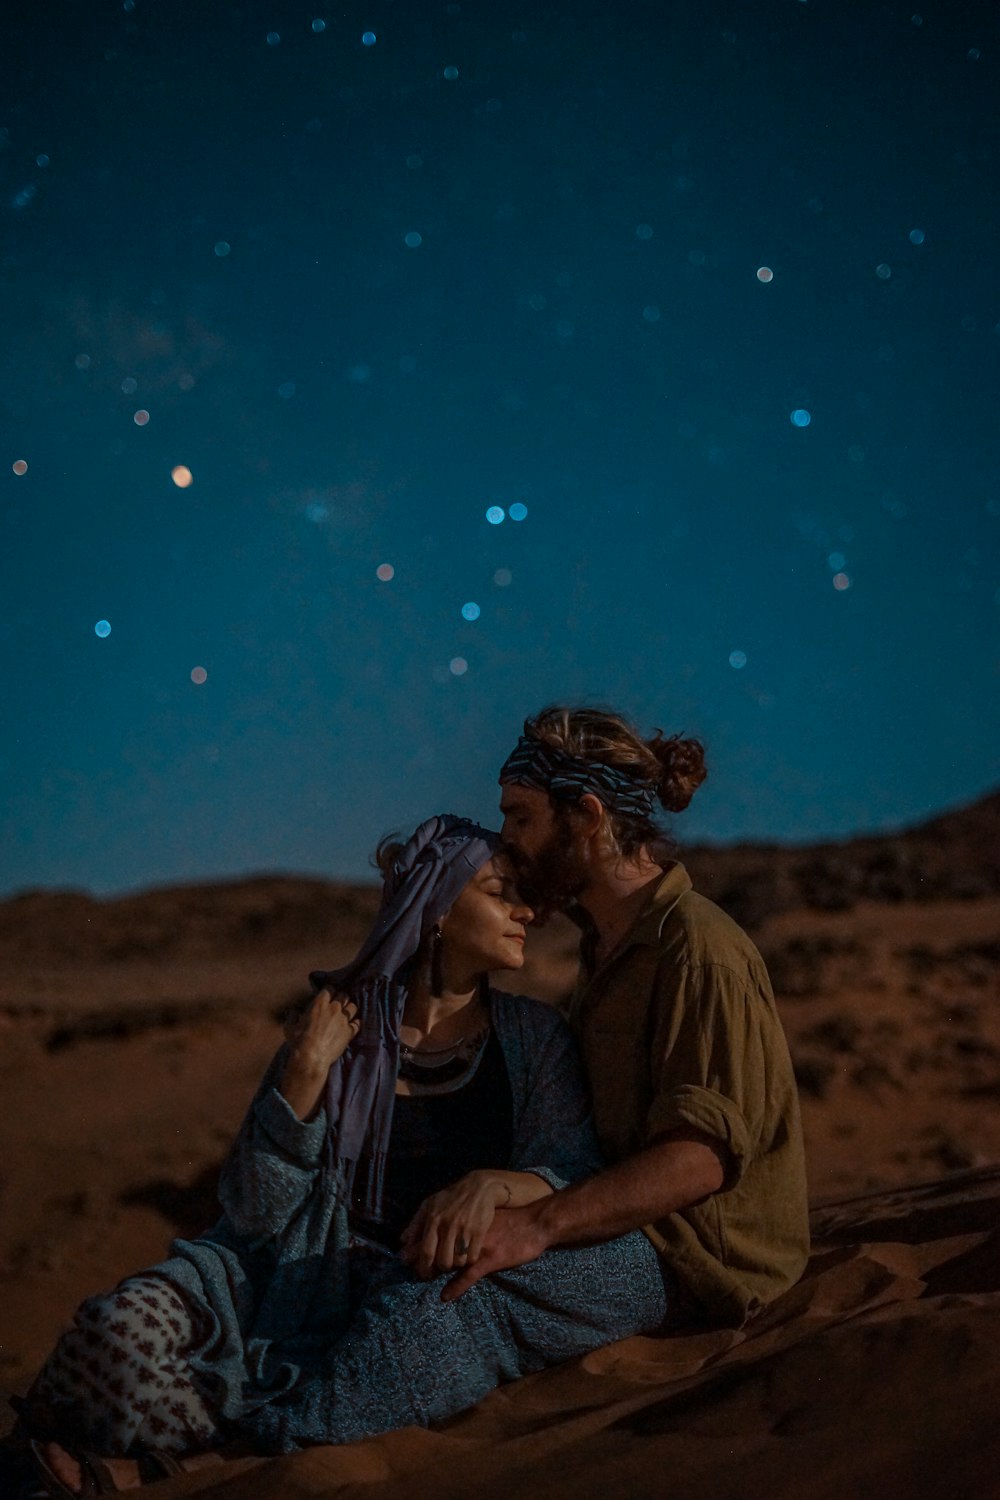 man and woman sitting on desert sand under blue sky during nighttime